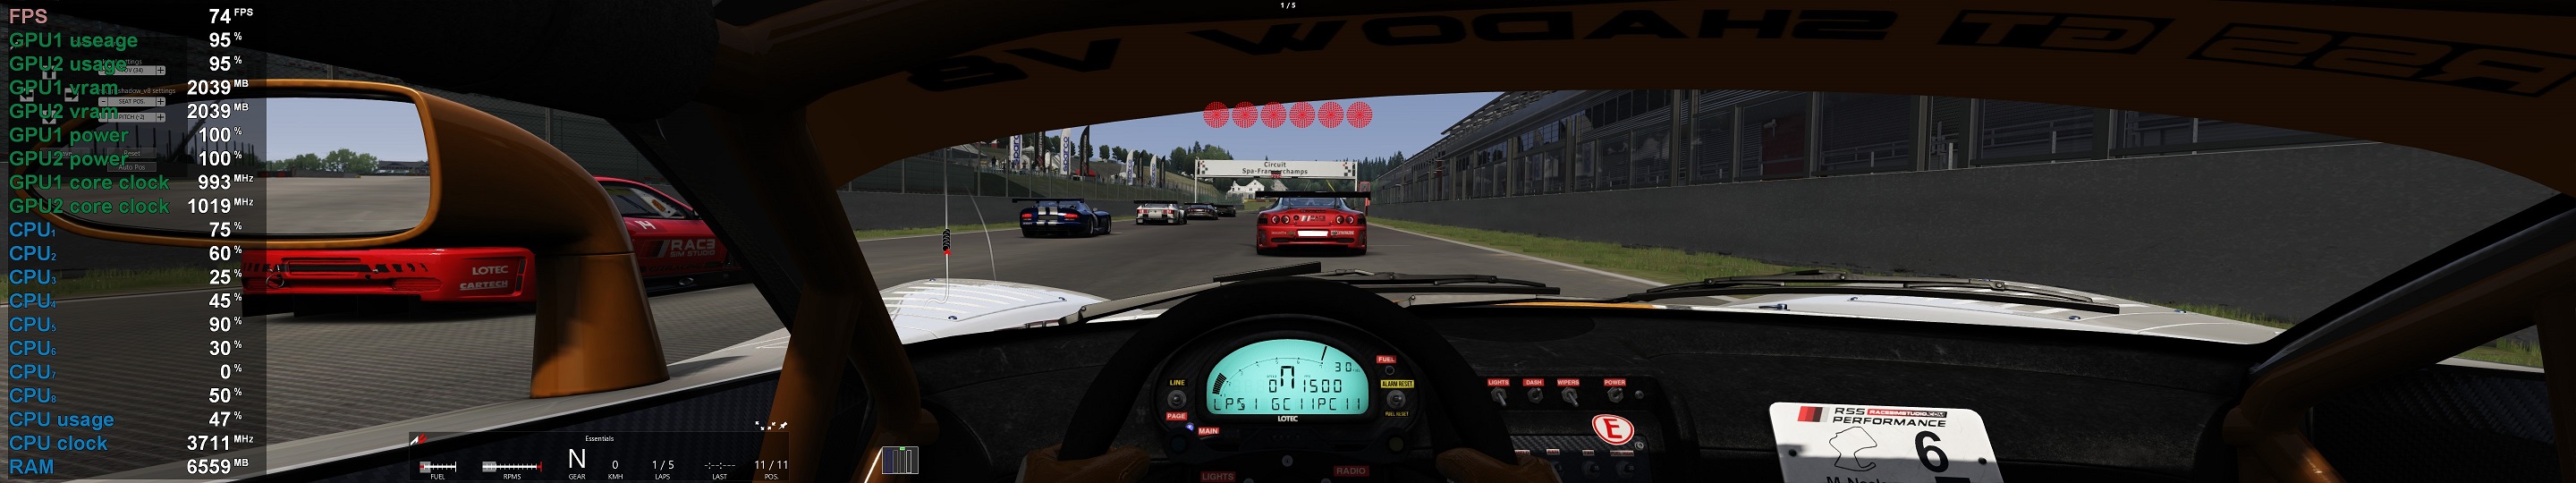 1 ASSETTO CORSA with MSI AB copy.jpg